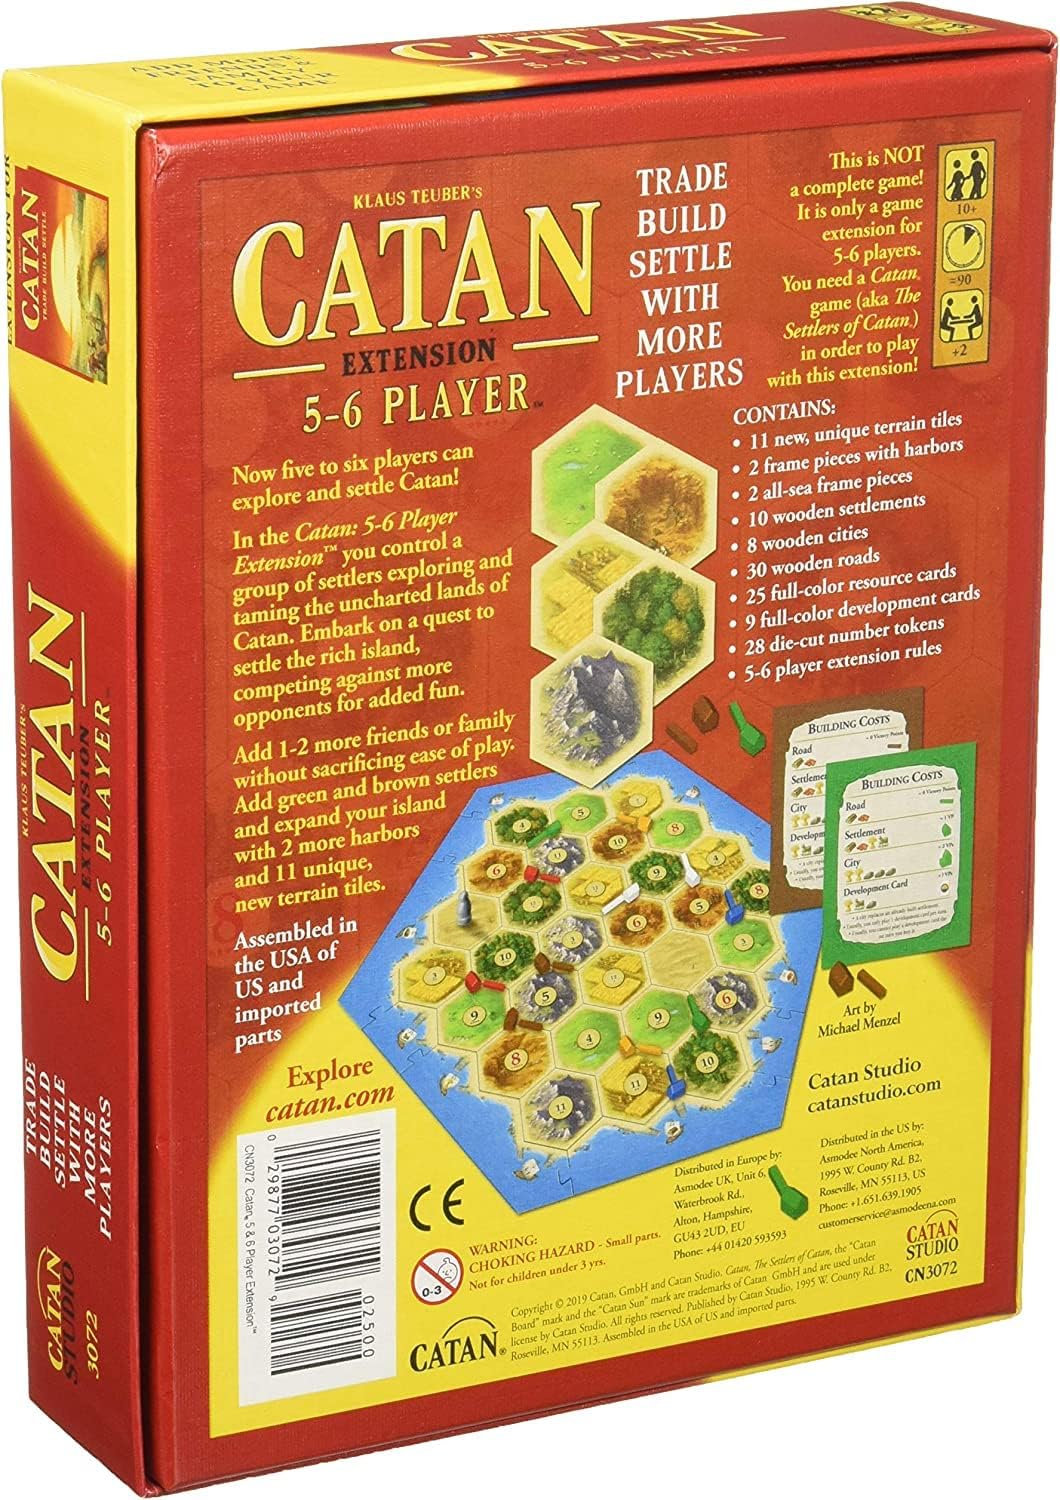 CATAN Board Game 5-6 Player Extension